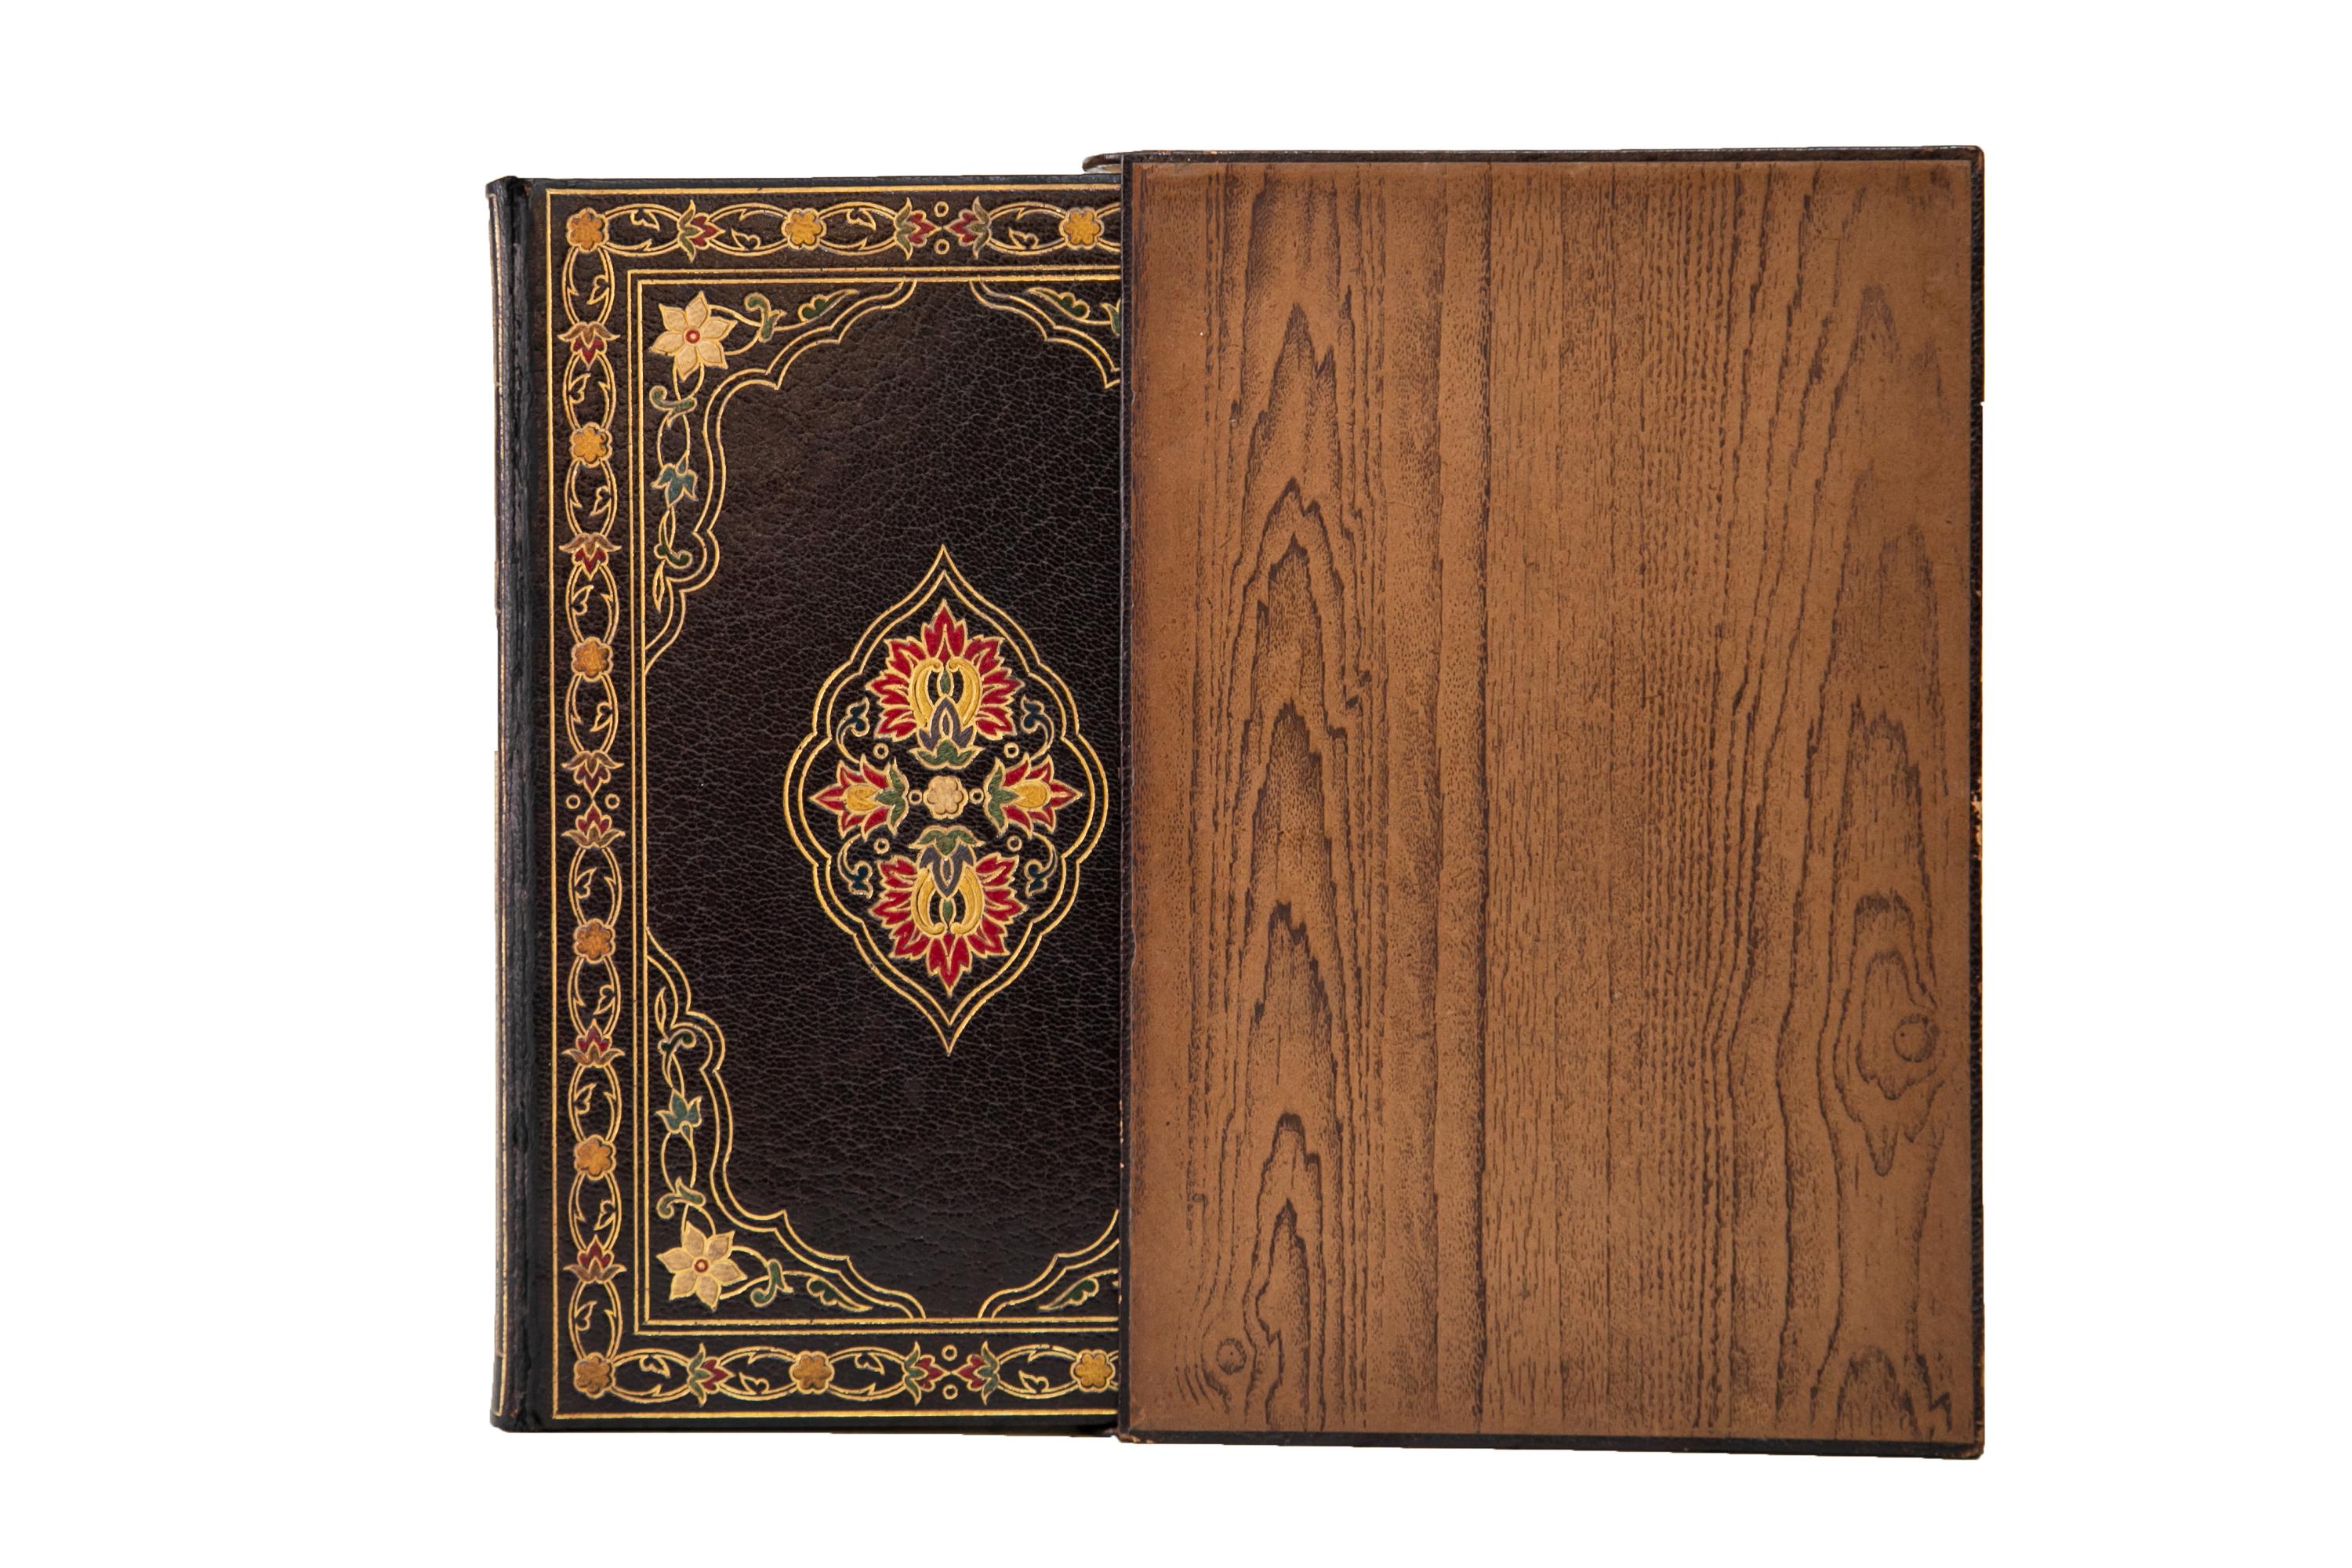 2 Volumes. Edward Fitzgerald, Rubáiyát of Omar Khayyám. First Edition. Bound by Pagnant in full brown morocco with the covers displaying ornate bordering and central floral gilt-tooled details with red, green, yellow, blue, white, and purple inlay.